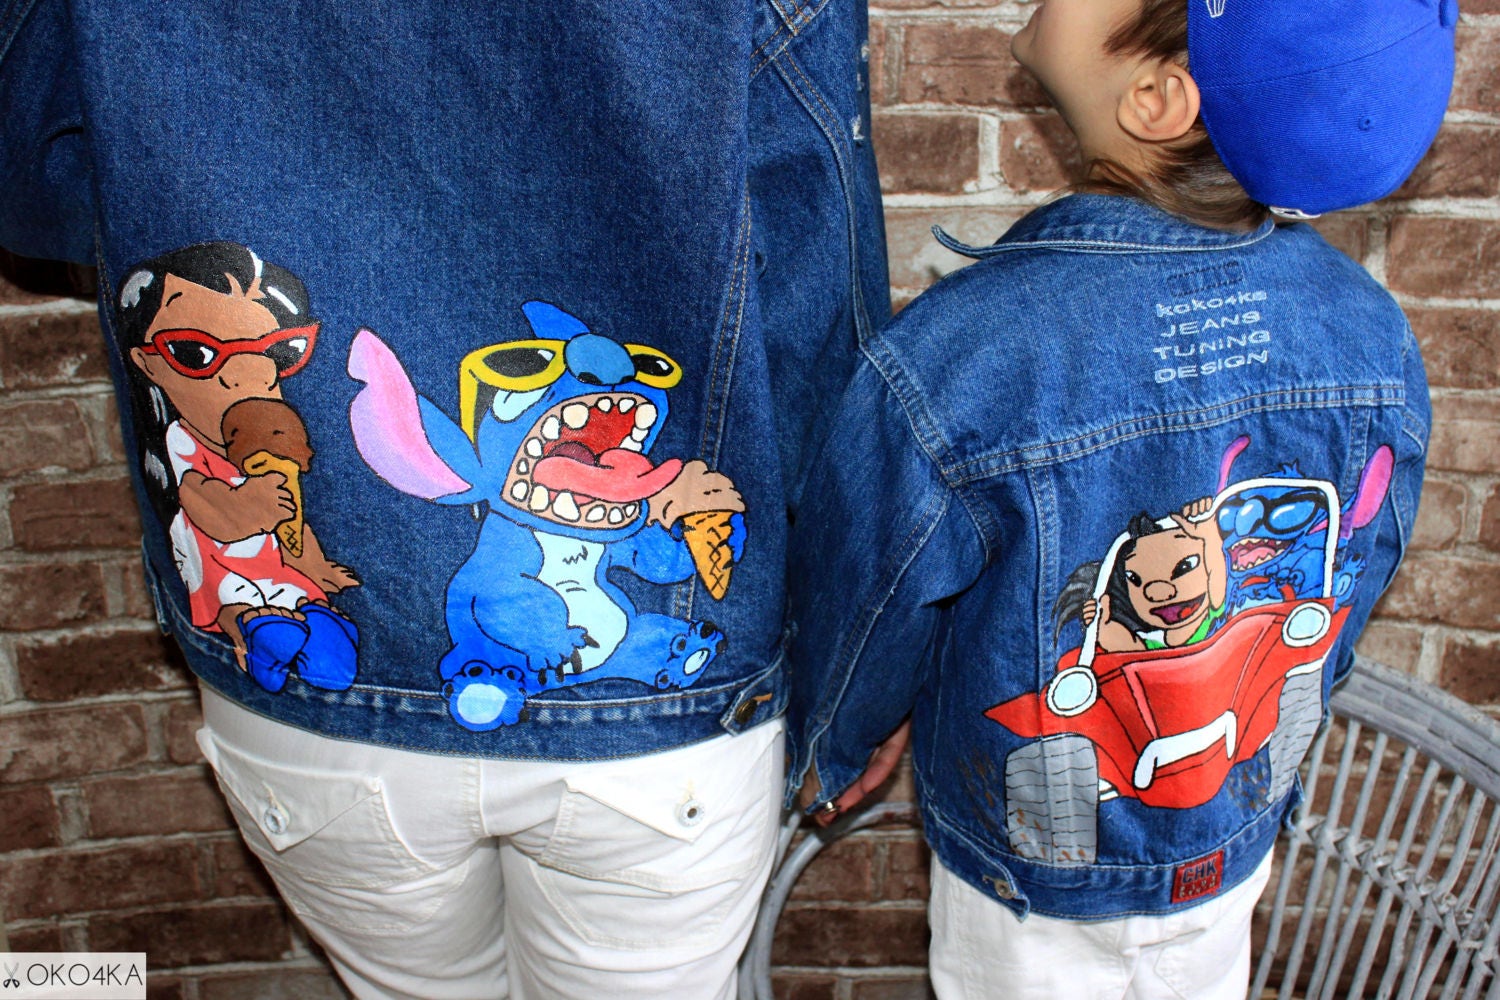 Hand painted denim Jacket with painting Jacket with art work 